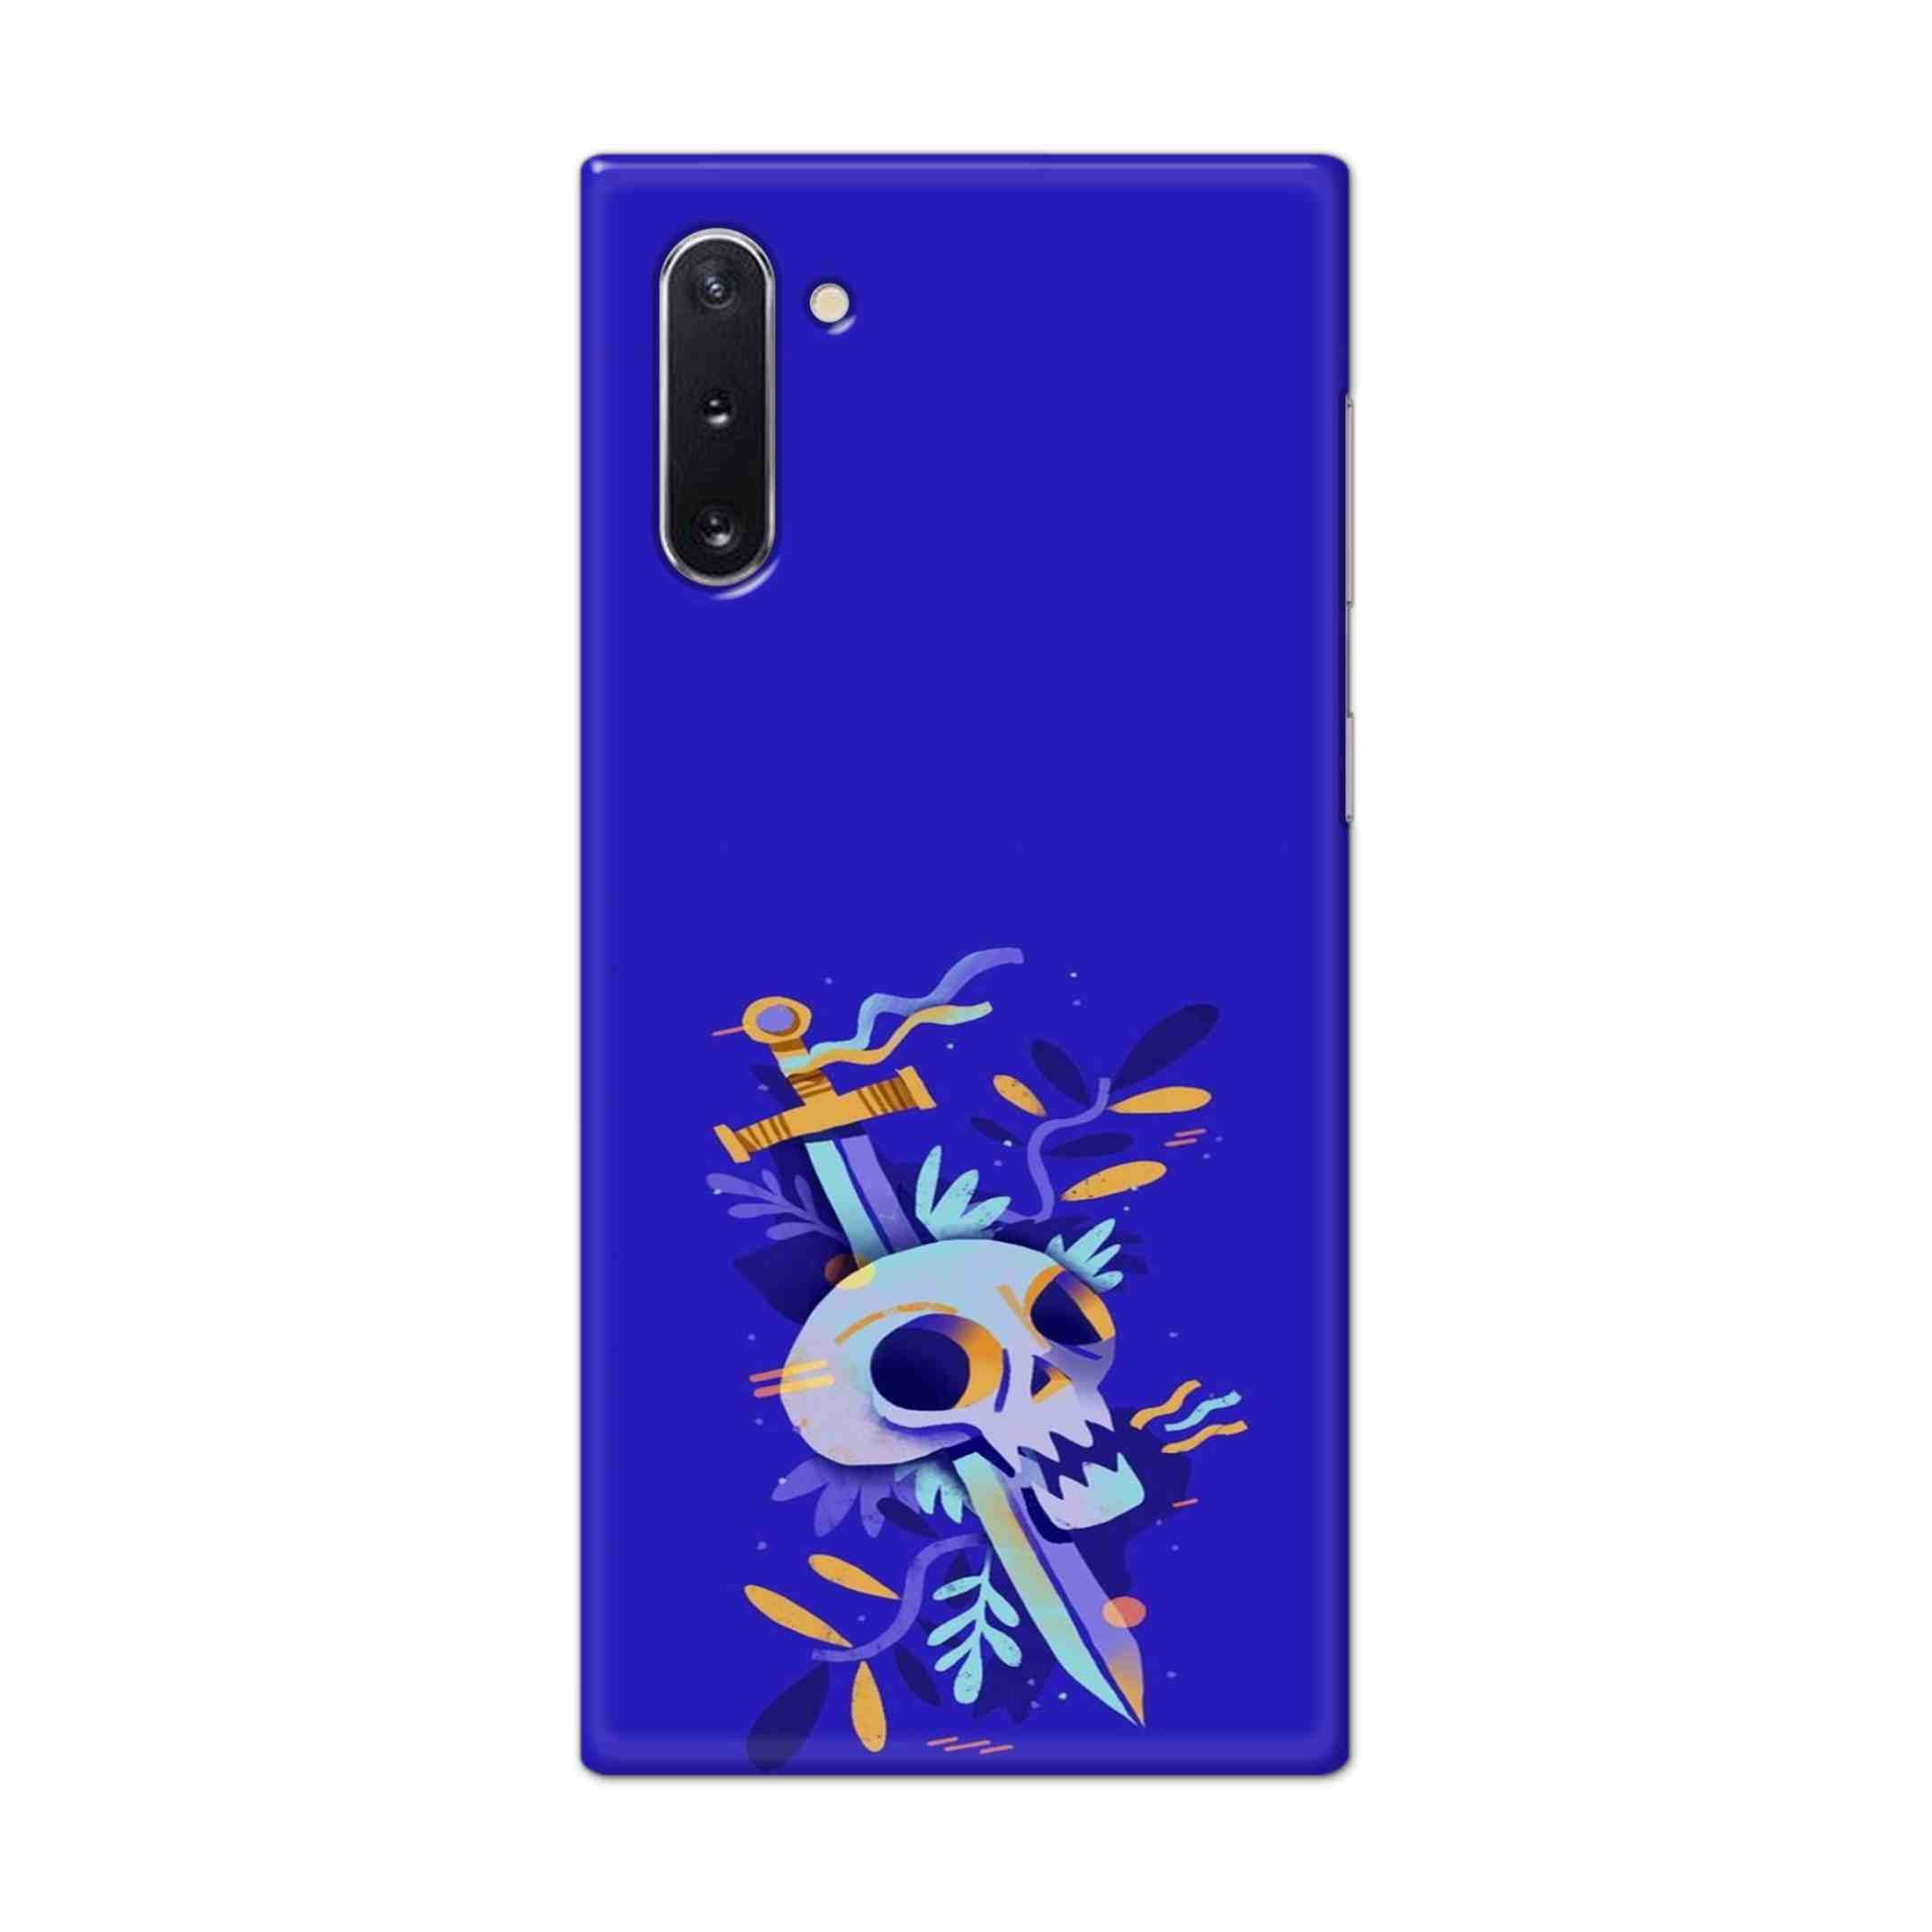 Buy Blue Skull Hard Back Mobile Phone Case Cover For Samsung Galaxy Note 10 Online